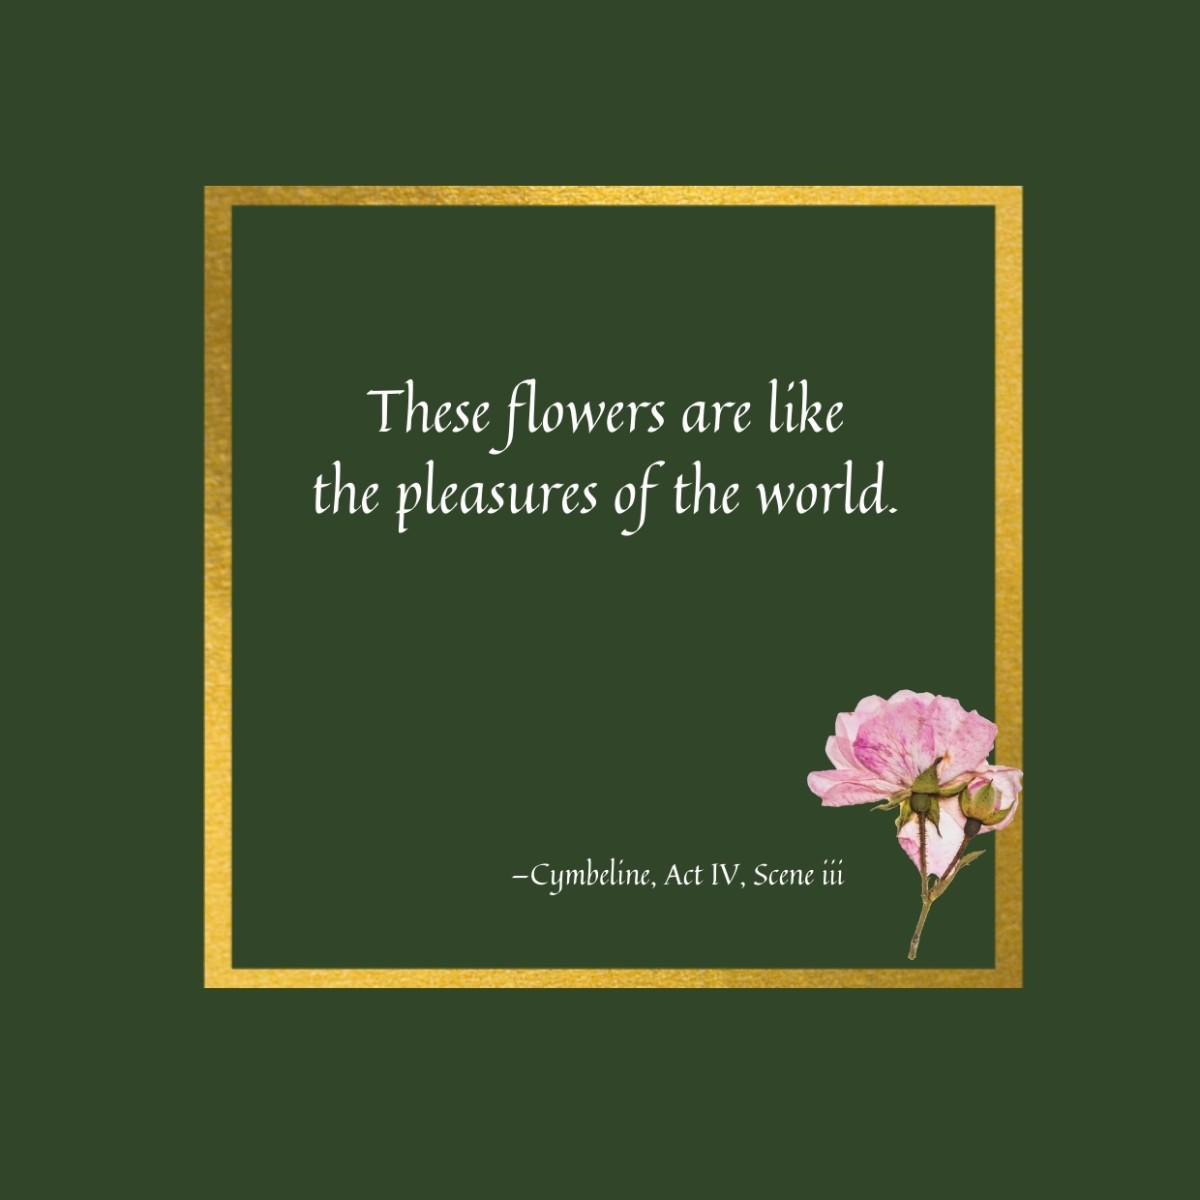 shakespeare-flower-quotes